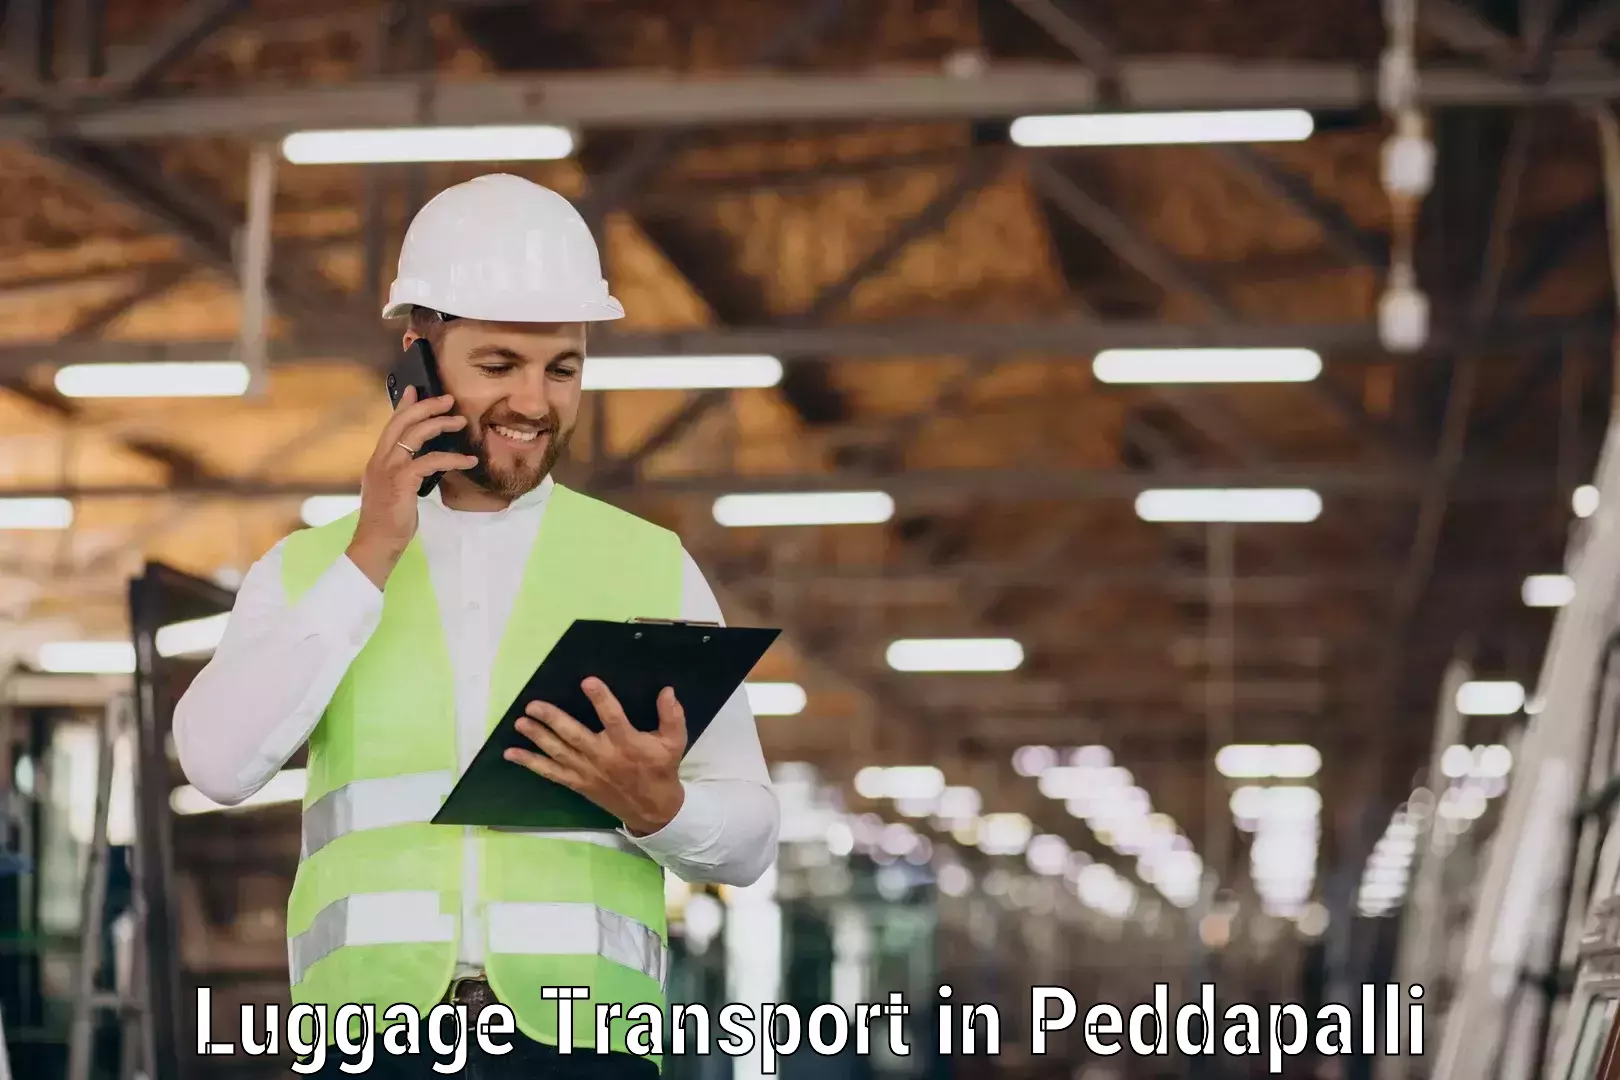 Luggage storage and delivery in Peddapalli